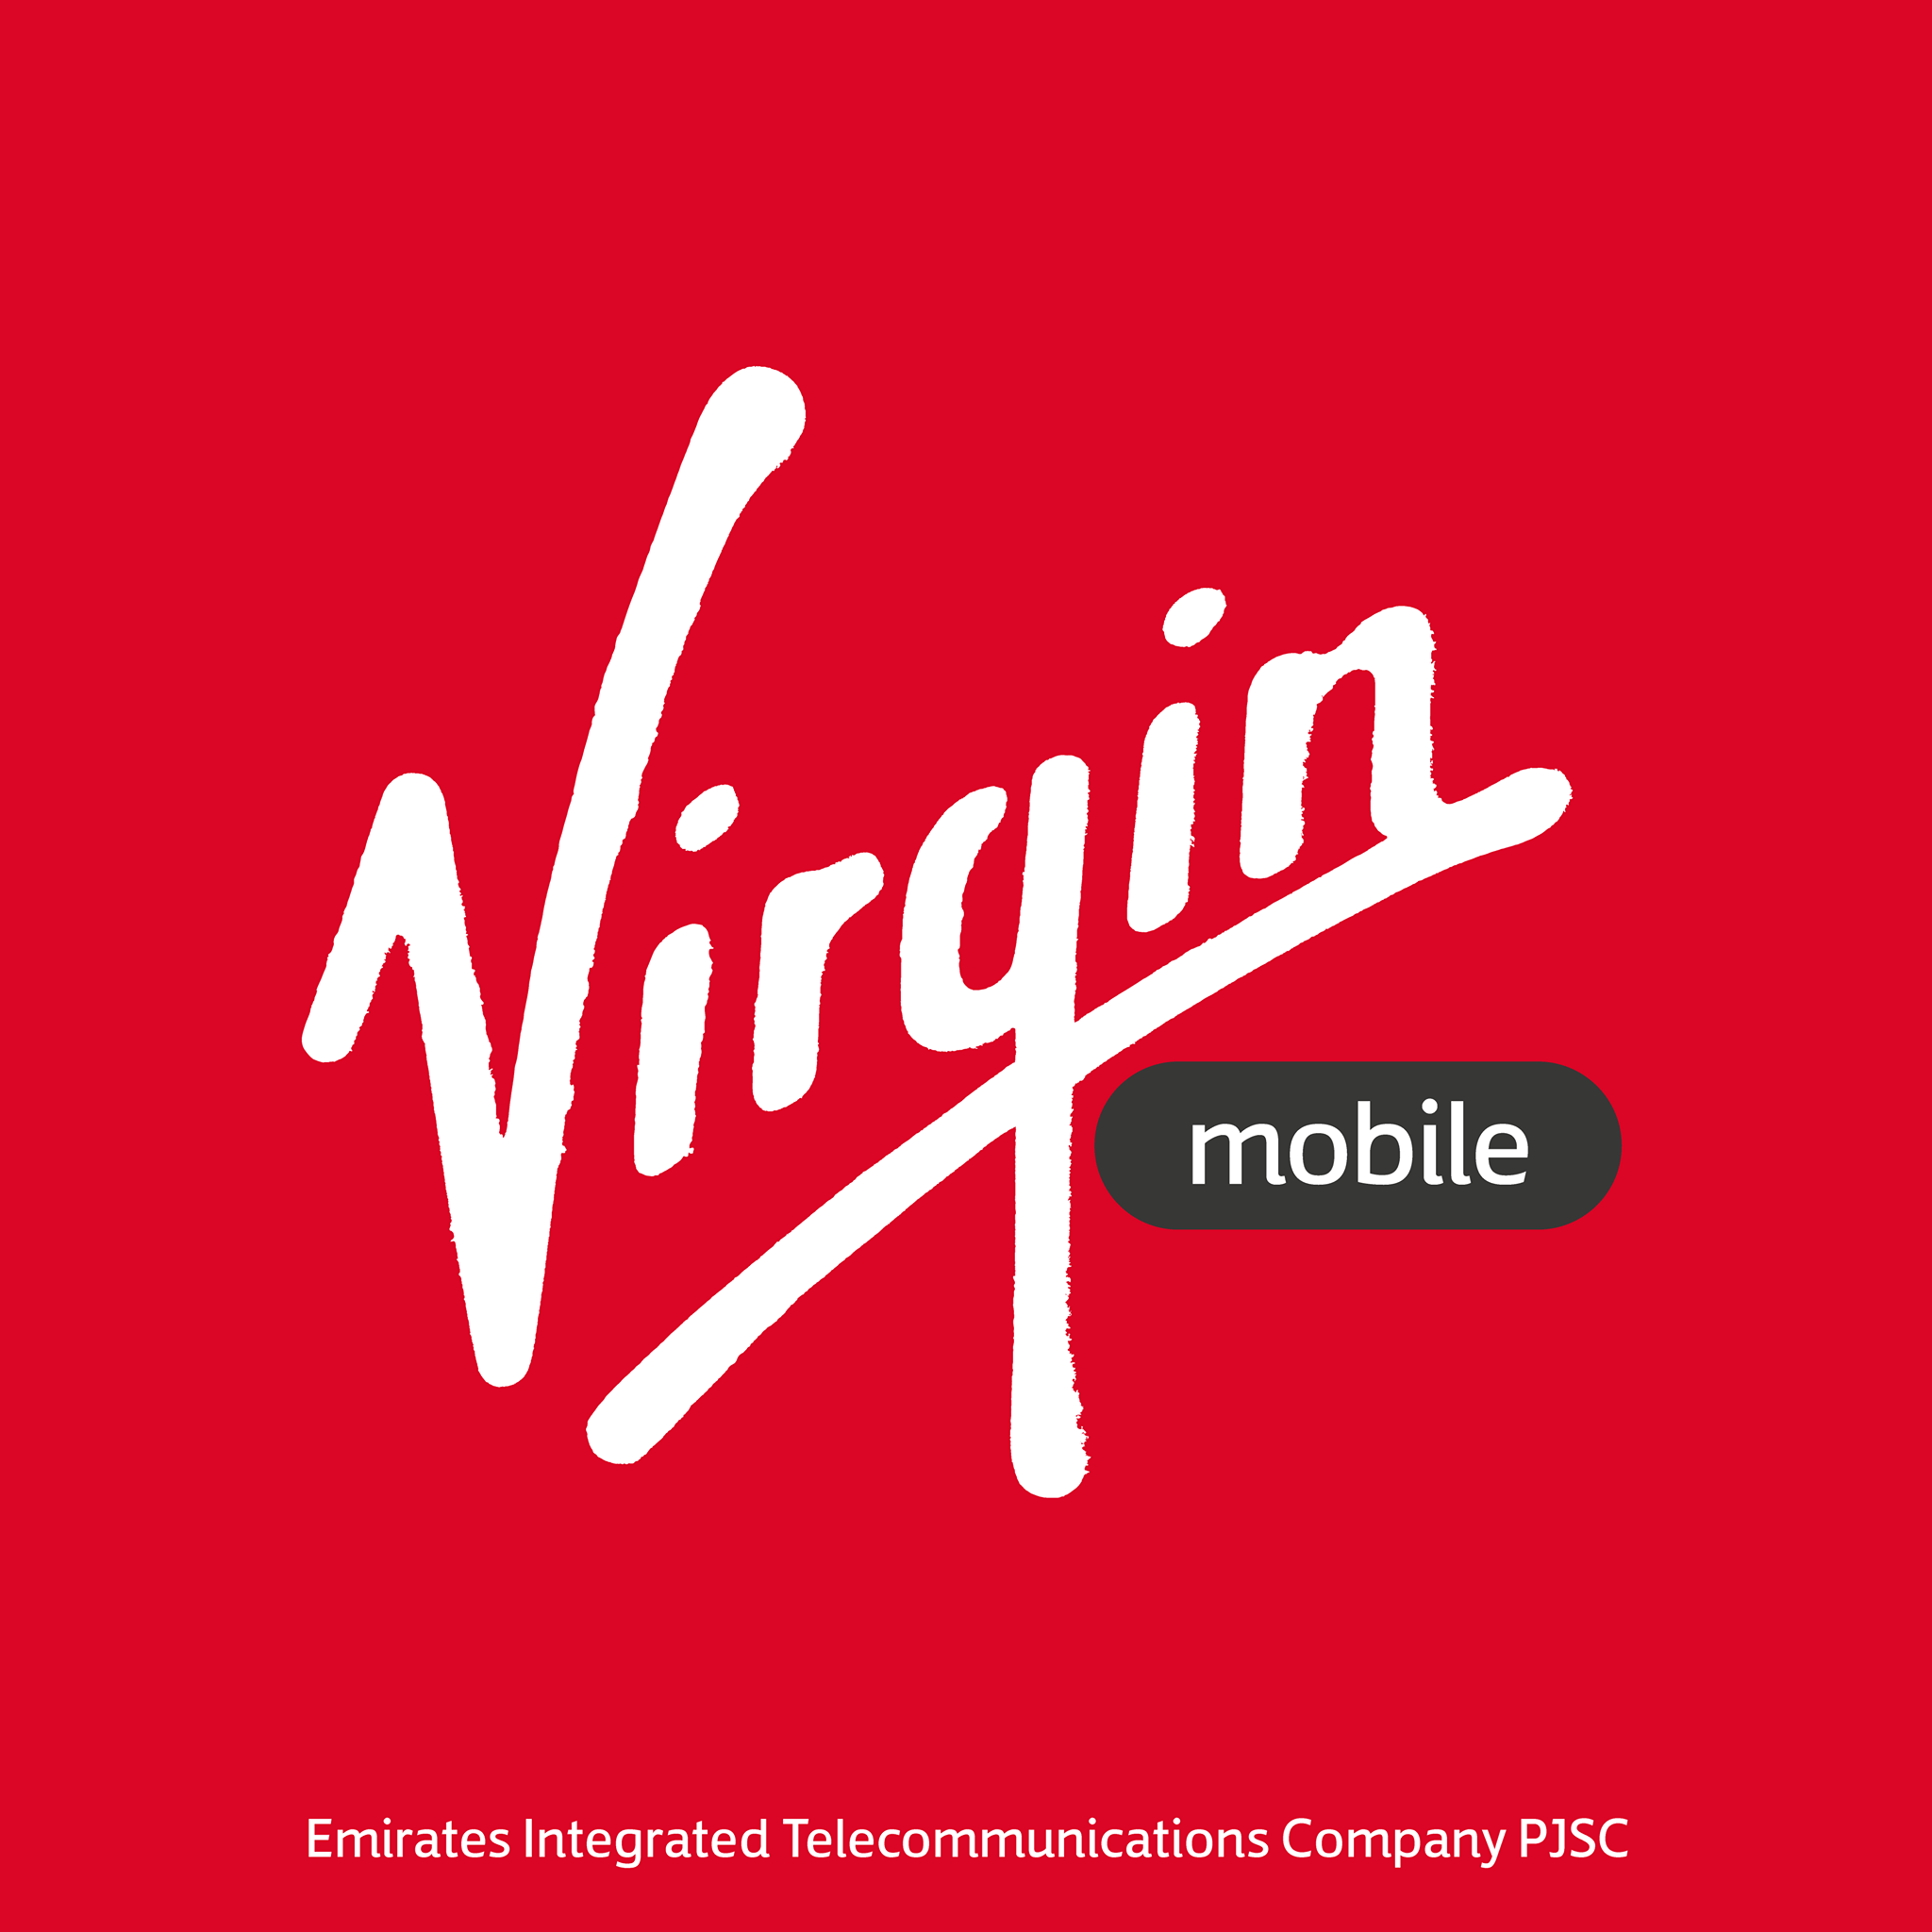 How Can I Contact Virgin Mobile Virgin Mobile Uae Make Mobile